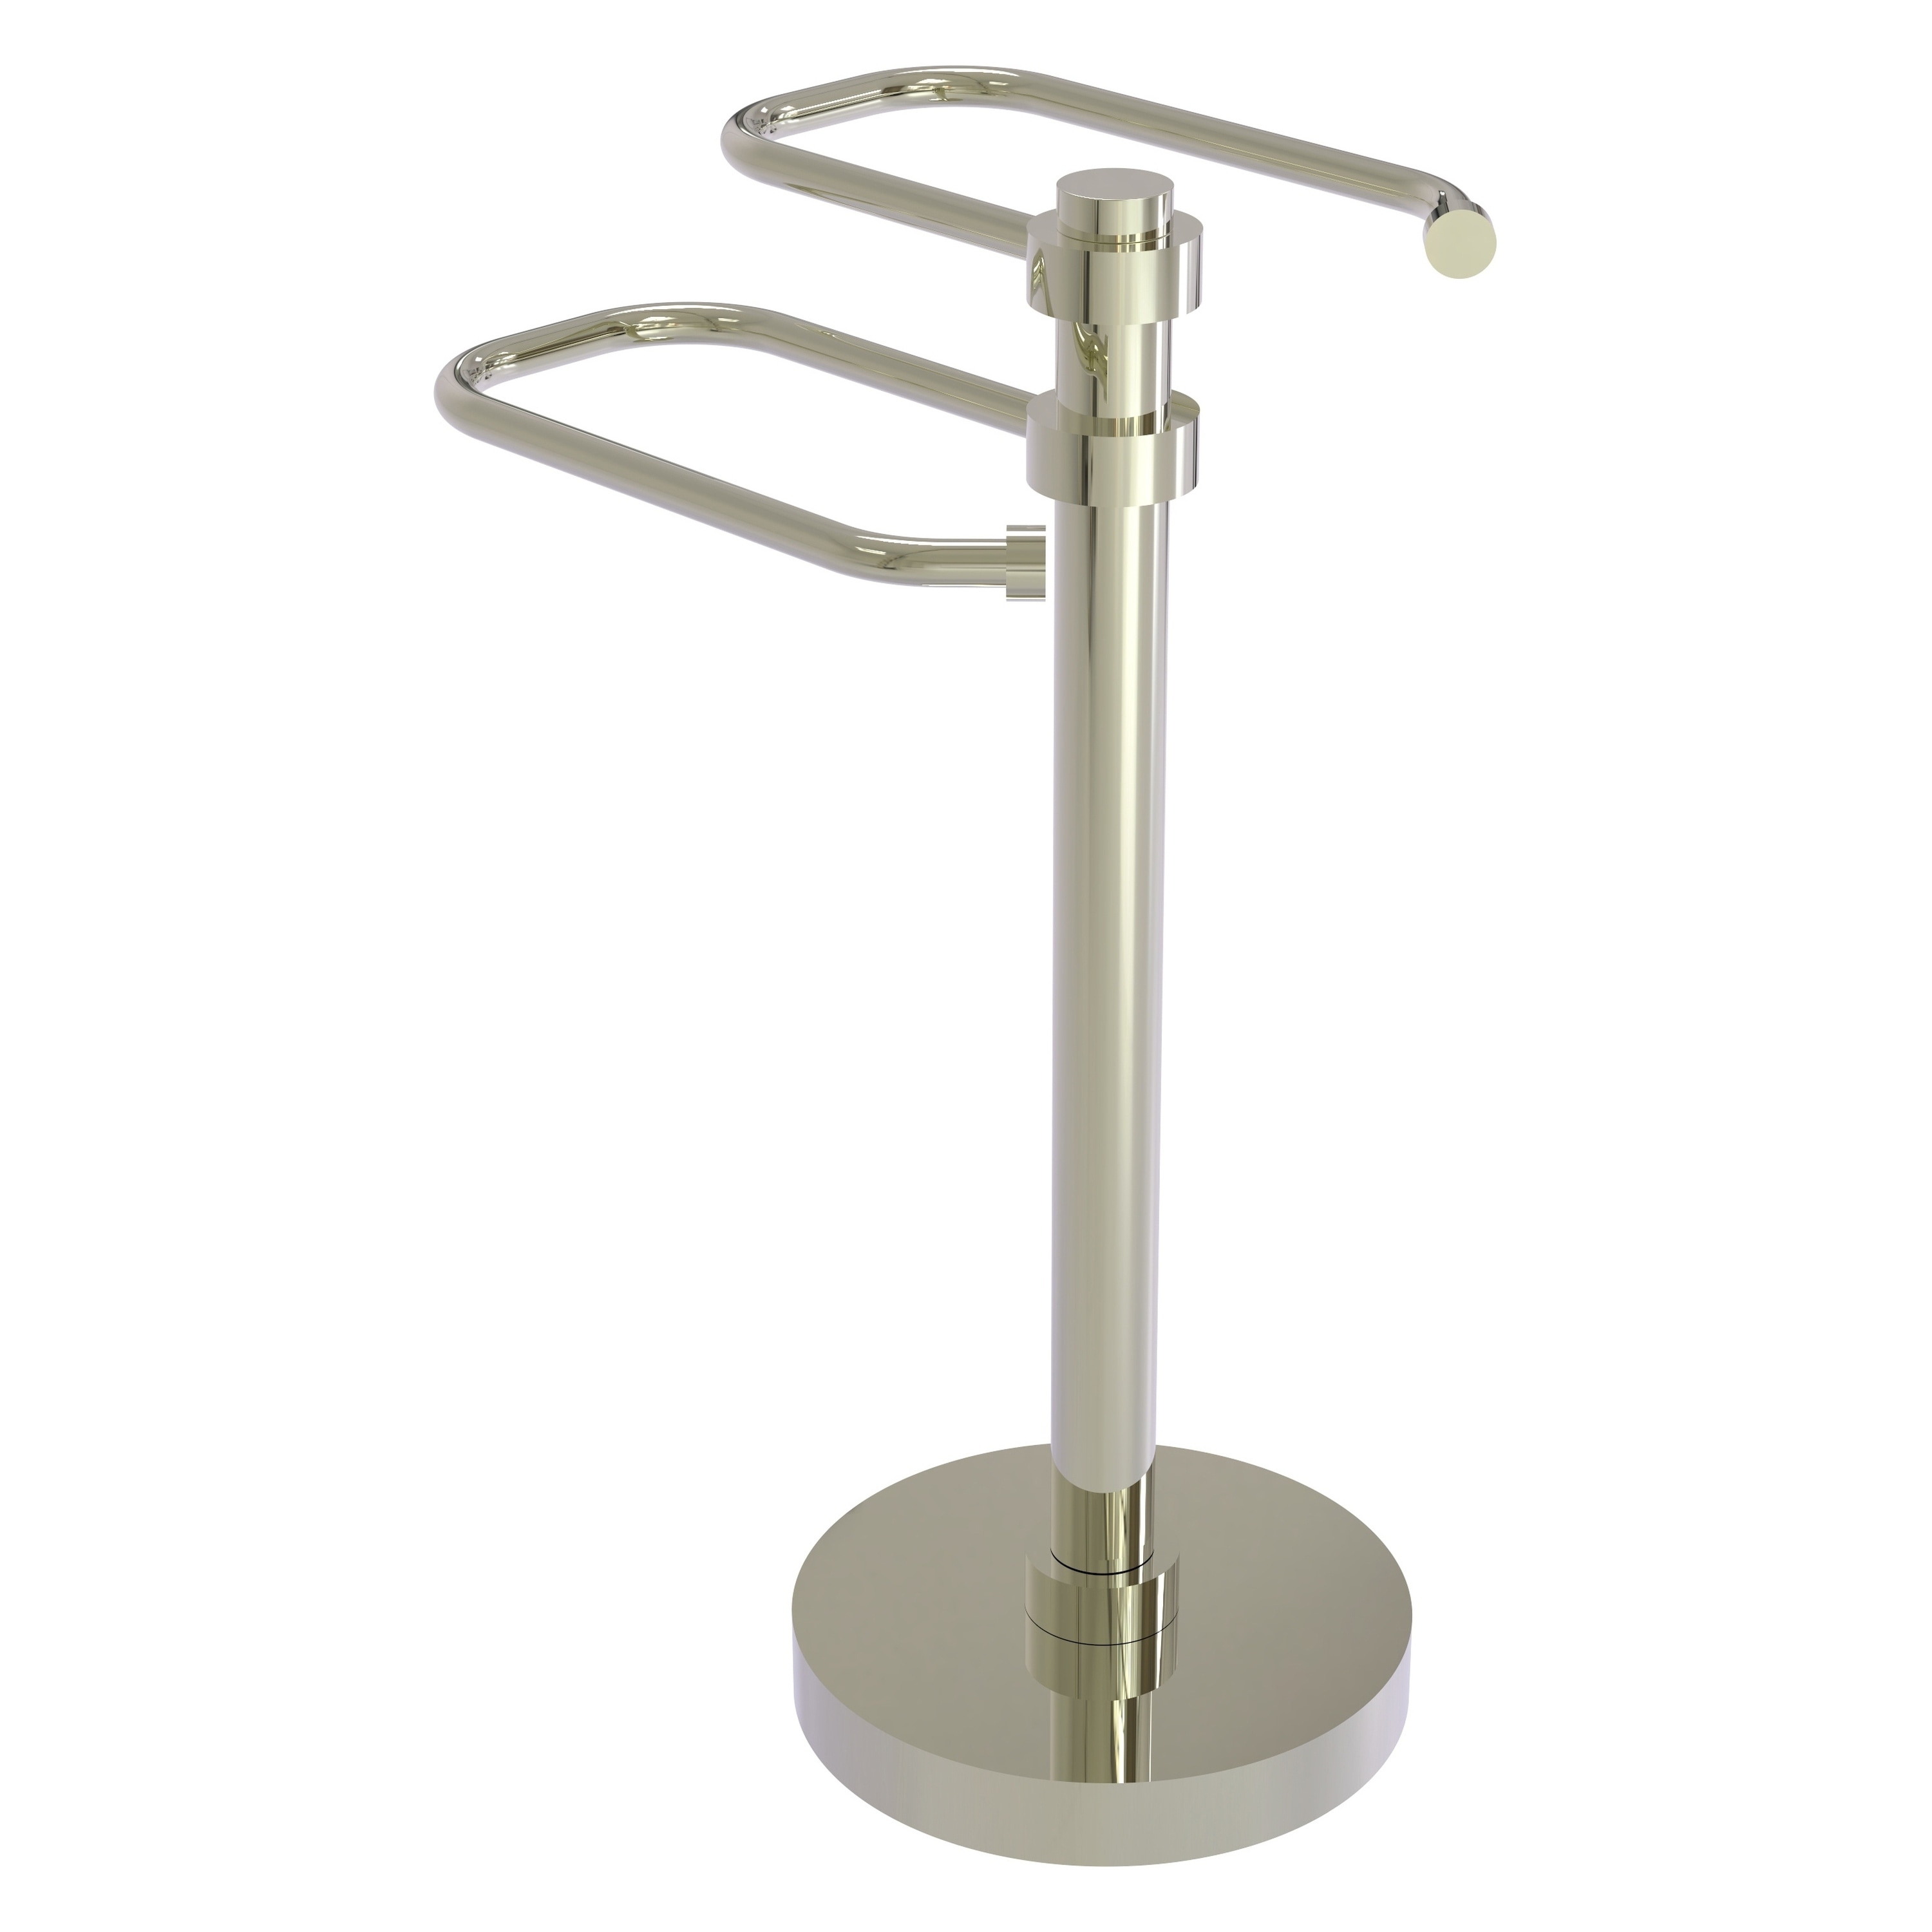 Allied Brass TS-28-PB Free Standing European Style Toilet Tissue Holder Polished Brass